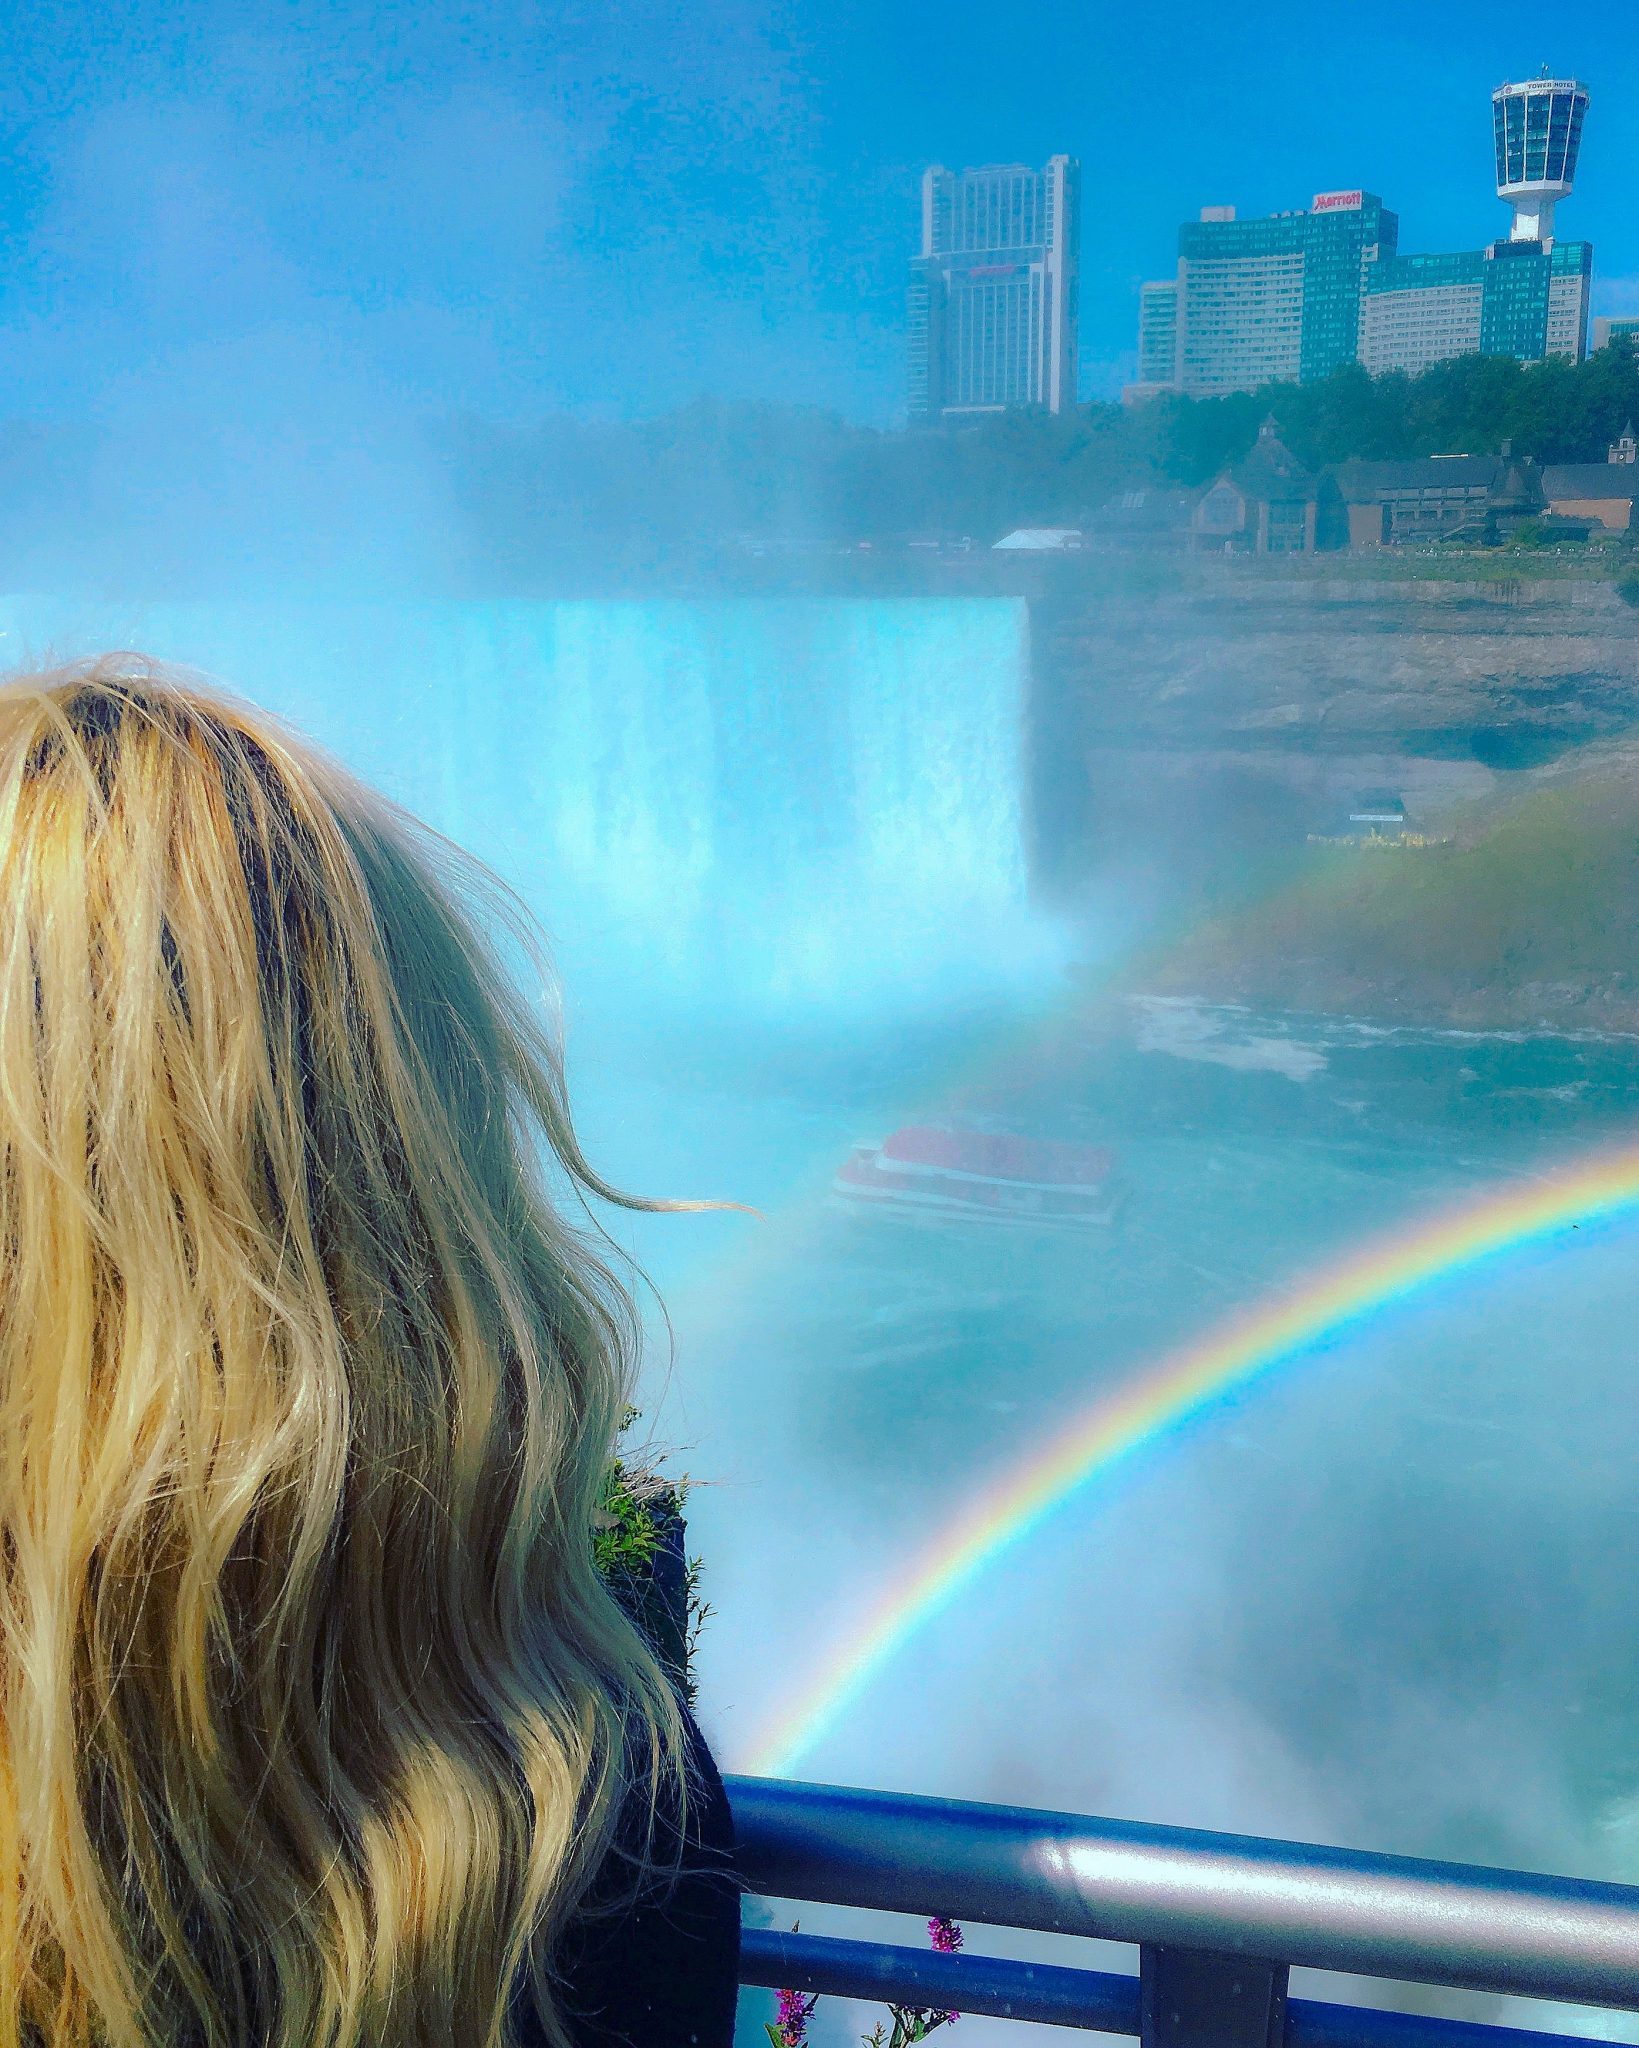 Visiting the Niagara Falls – 5 great tips for an amazing day